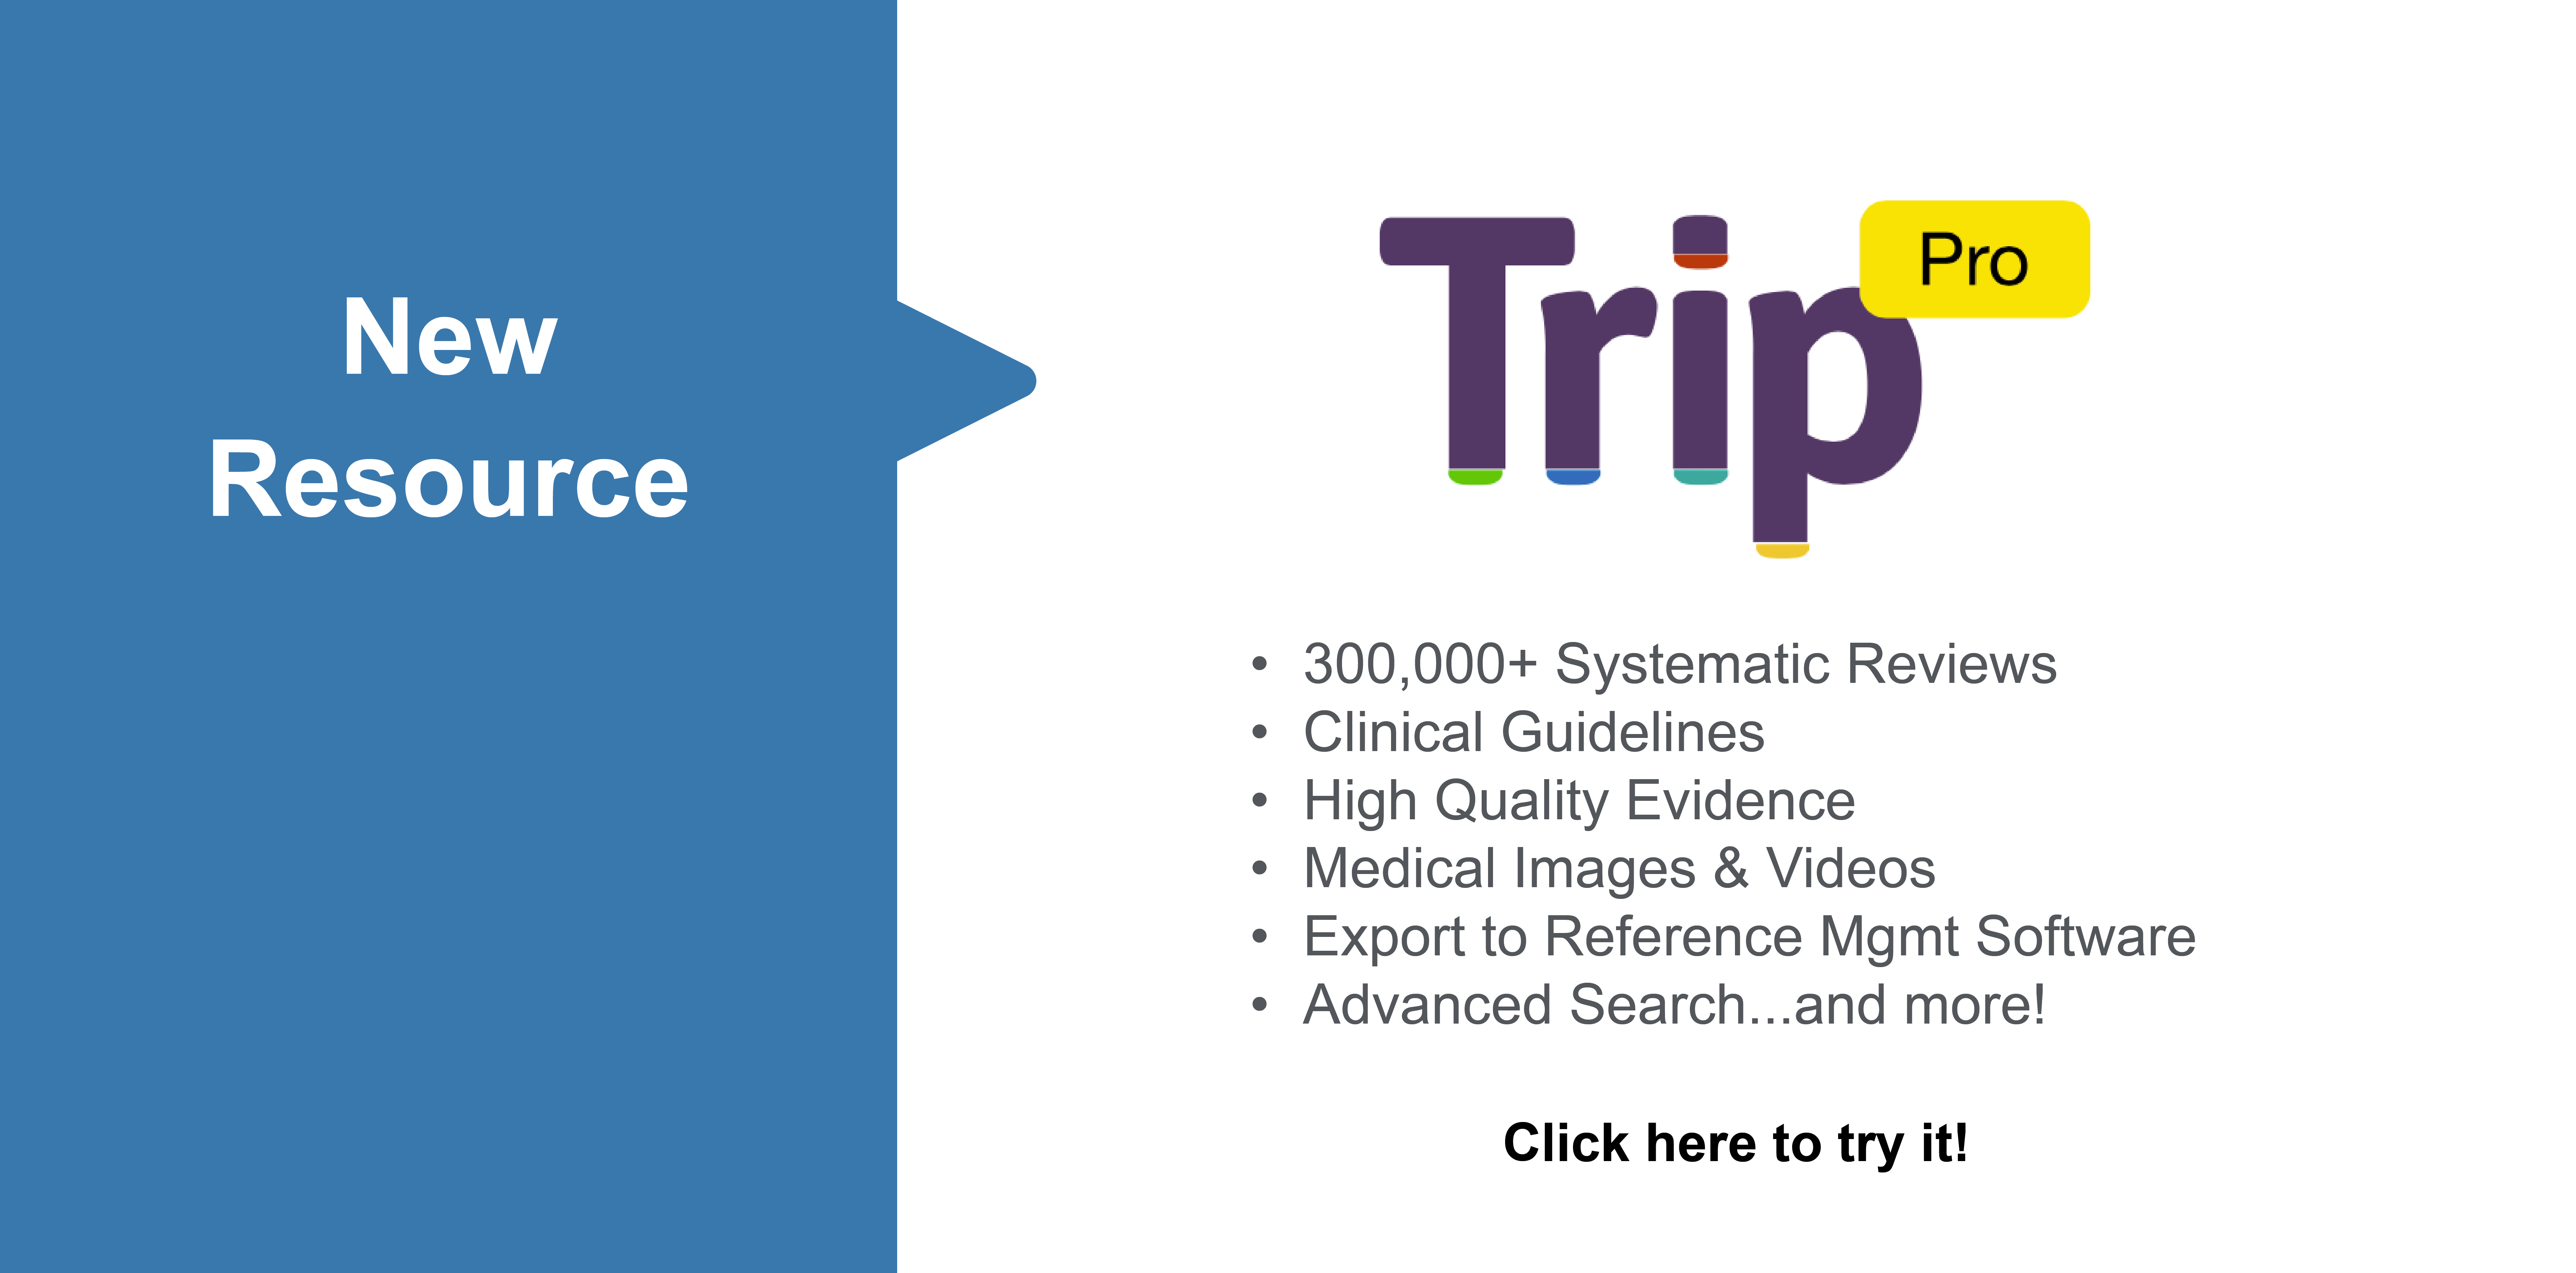 Check out the Trip Pro database